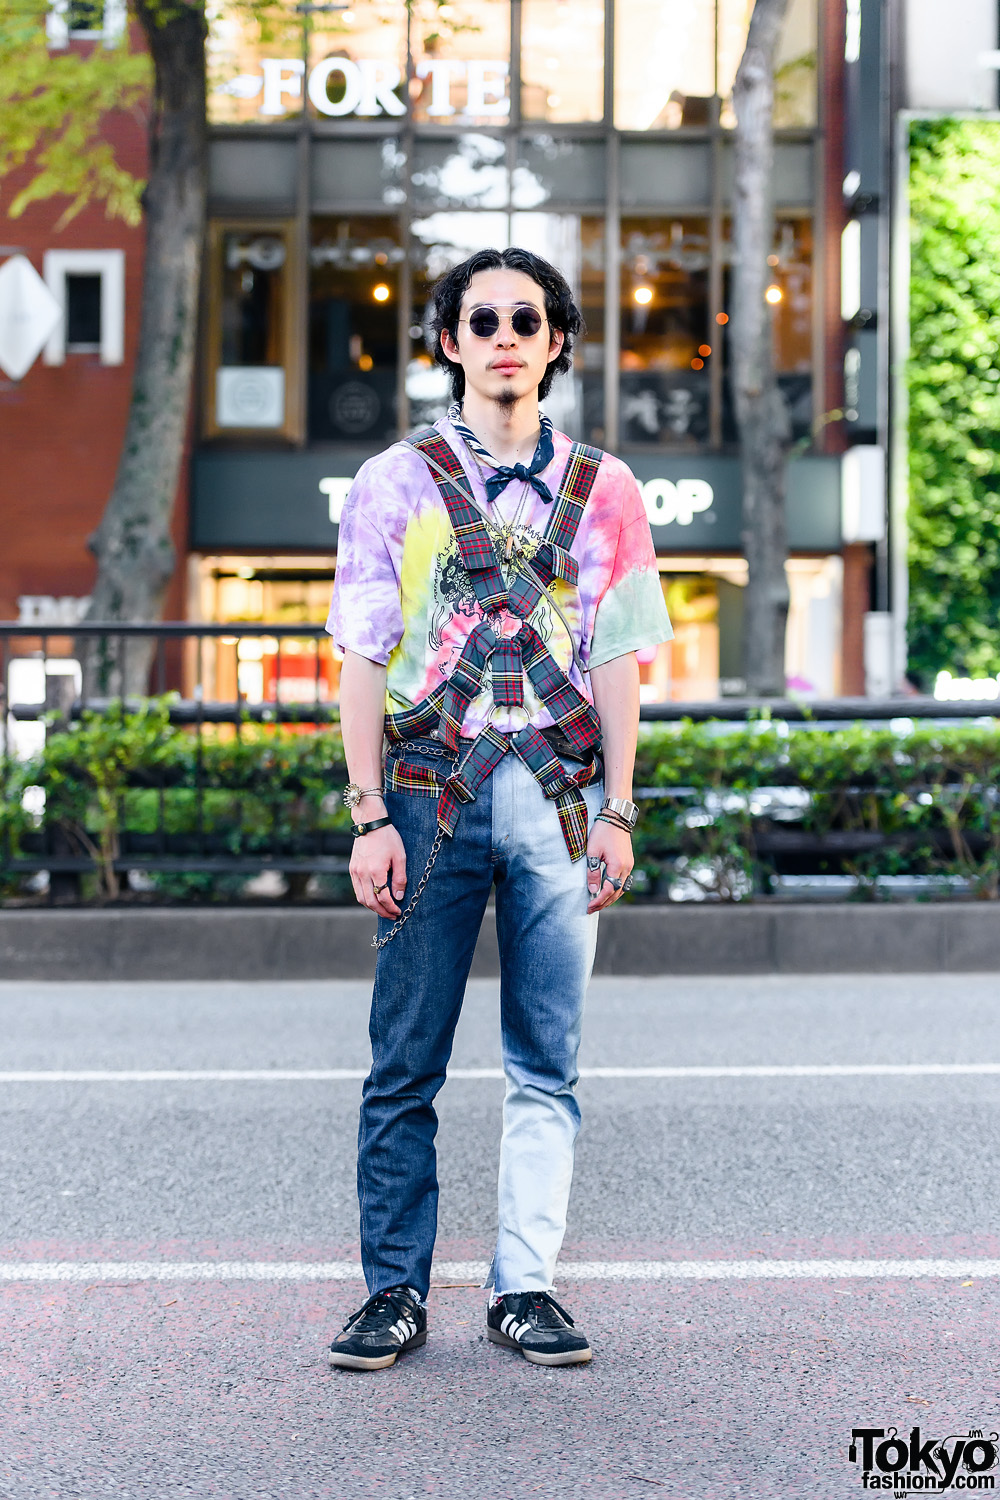 Student in Vintage Fashion w/ Body Harness, Round Sunglasses, Tie Dye Shirt, Levi's Jeans, Al's Attire Crossbody, Adidas Samba Classic Shoes, and Vintage Casio Watch